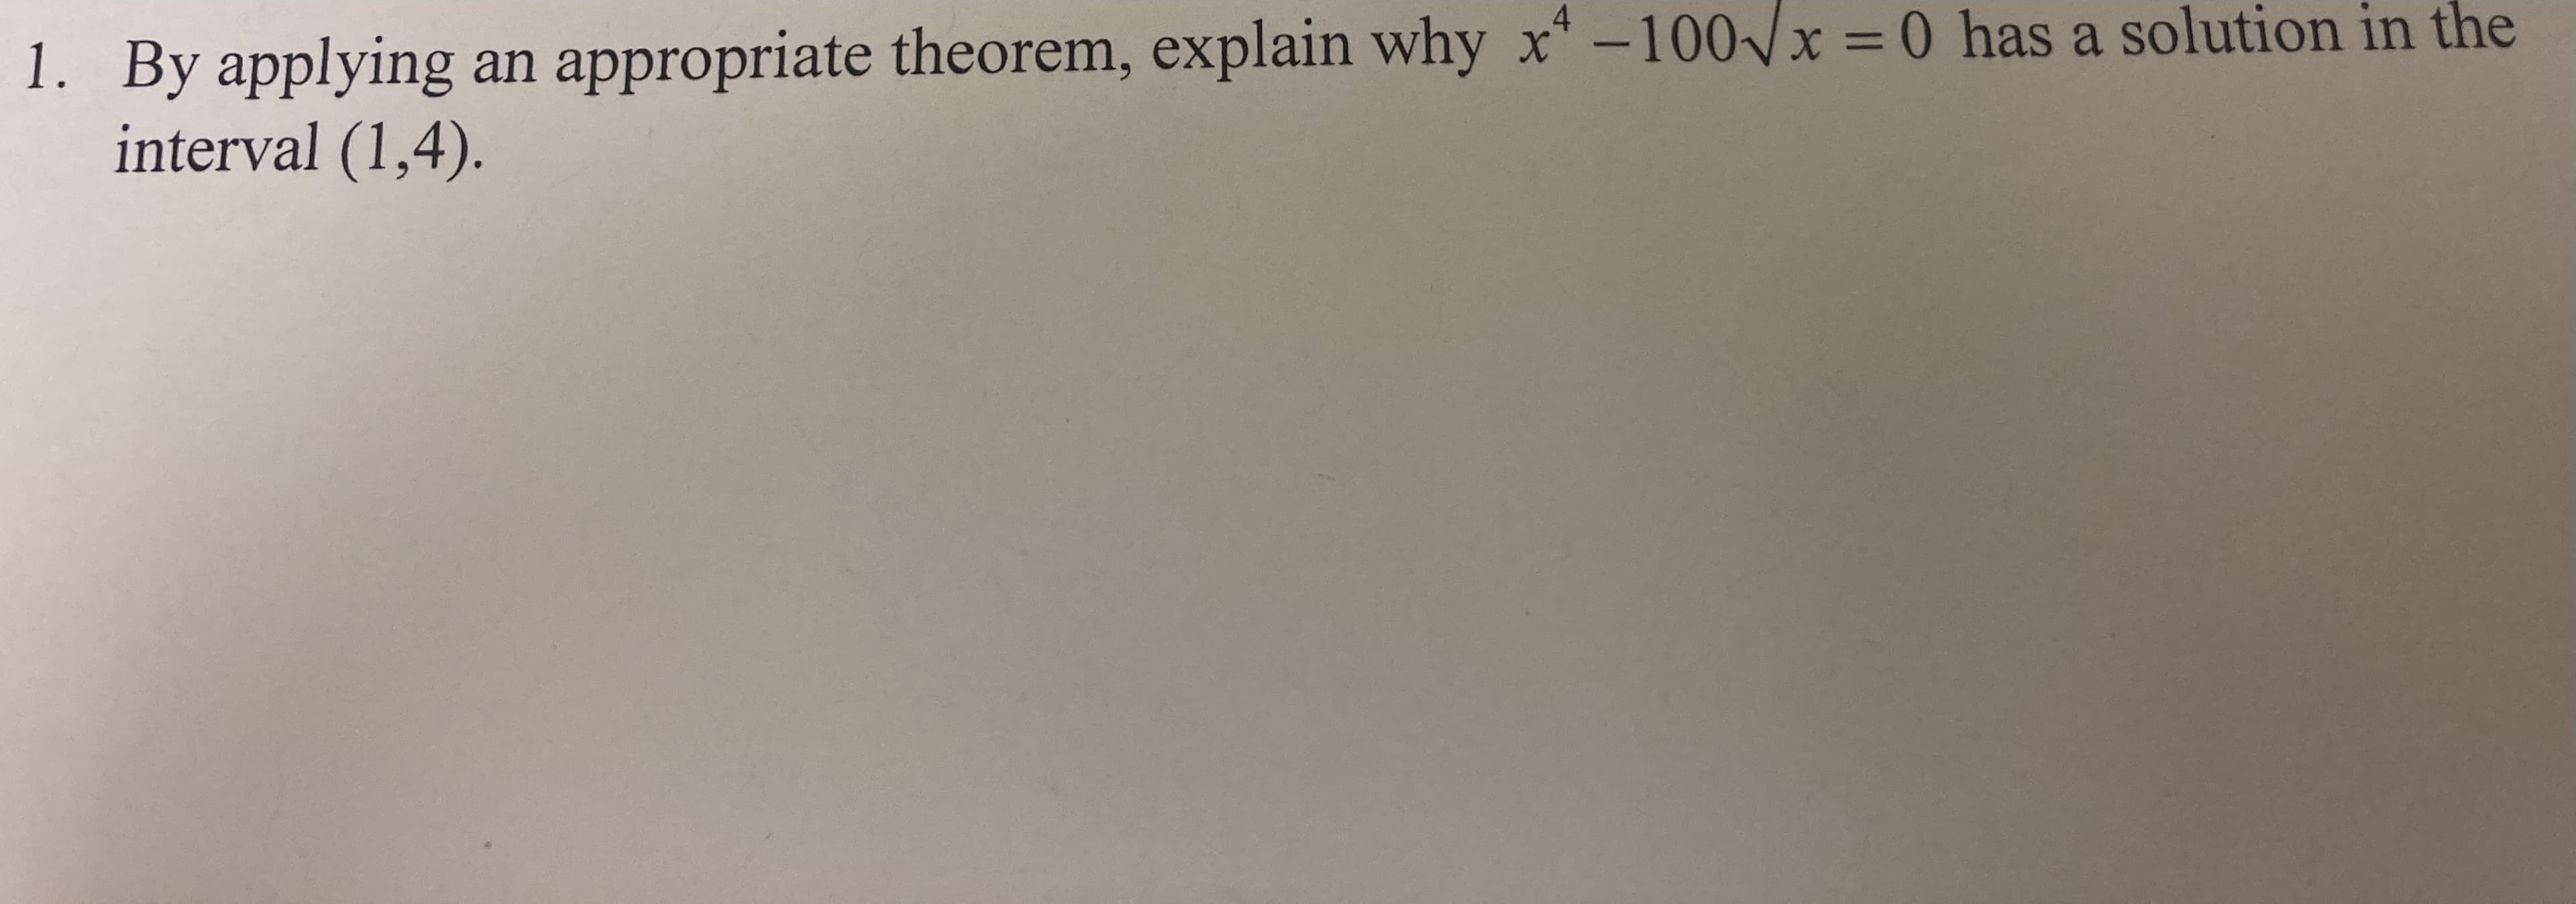 1. By applying an appropriate theorem, explain why x-100 x = 0 has a solution in the
interval (1,4).
